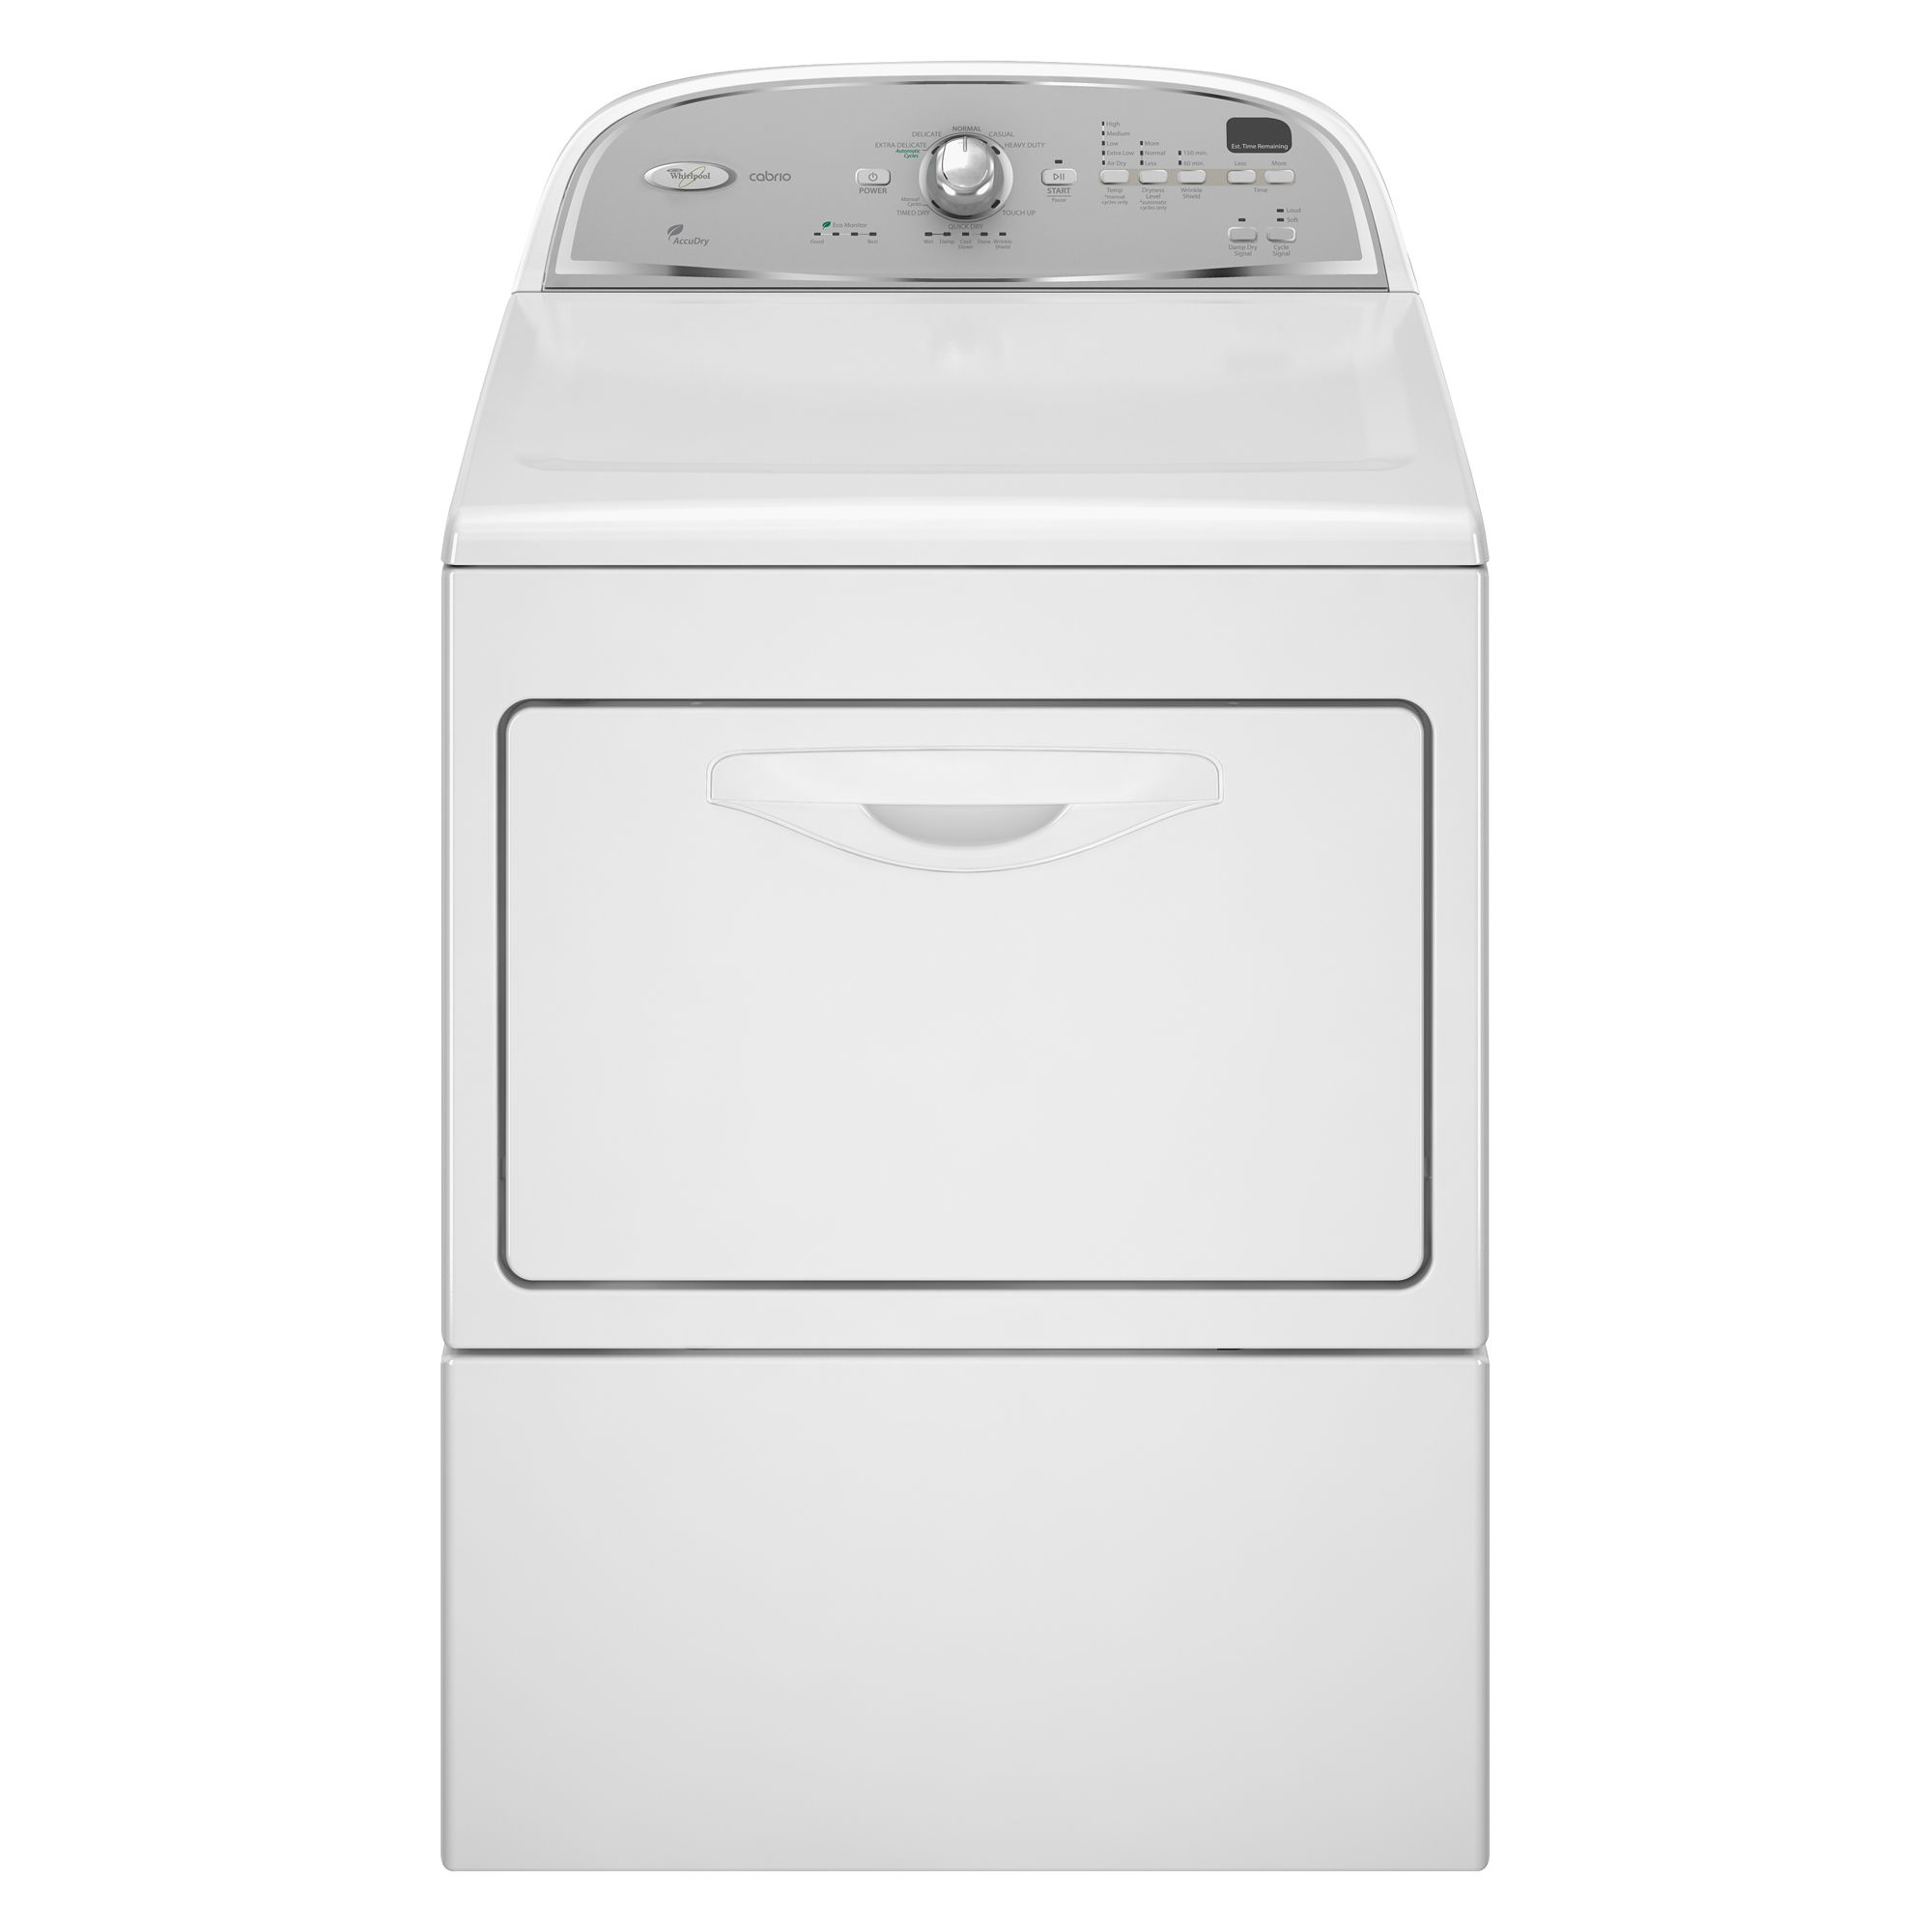 Whirlpool 7.4 cu. ft. Cabrio® Electric Dryer - White | Shop Your Way